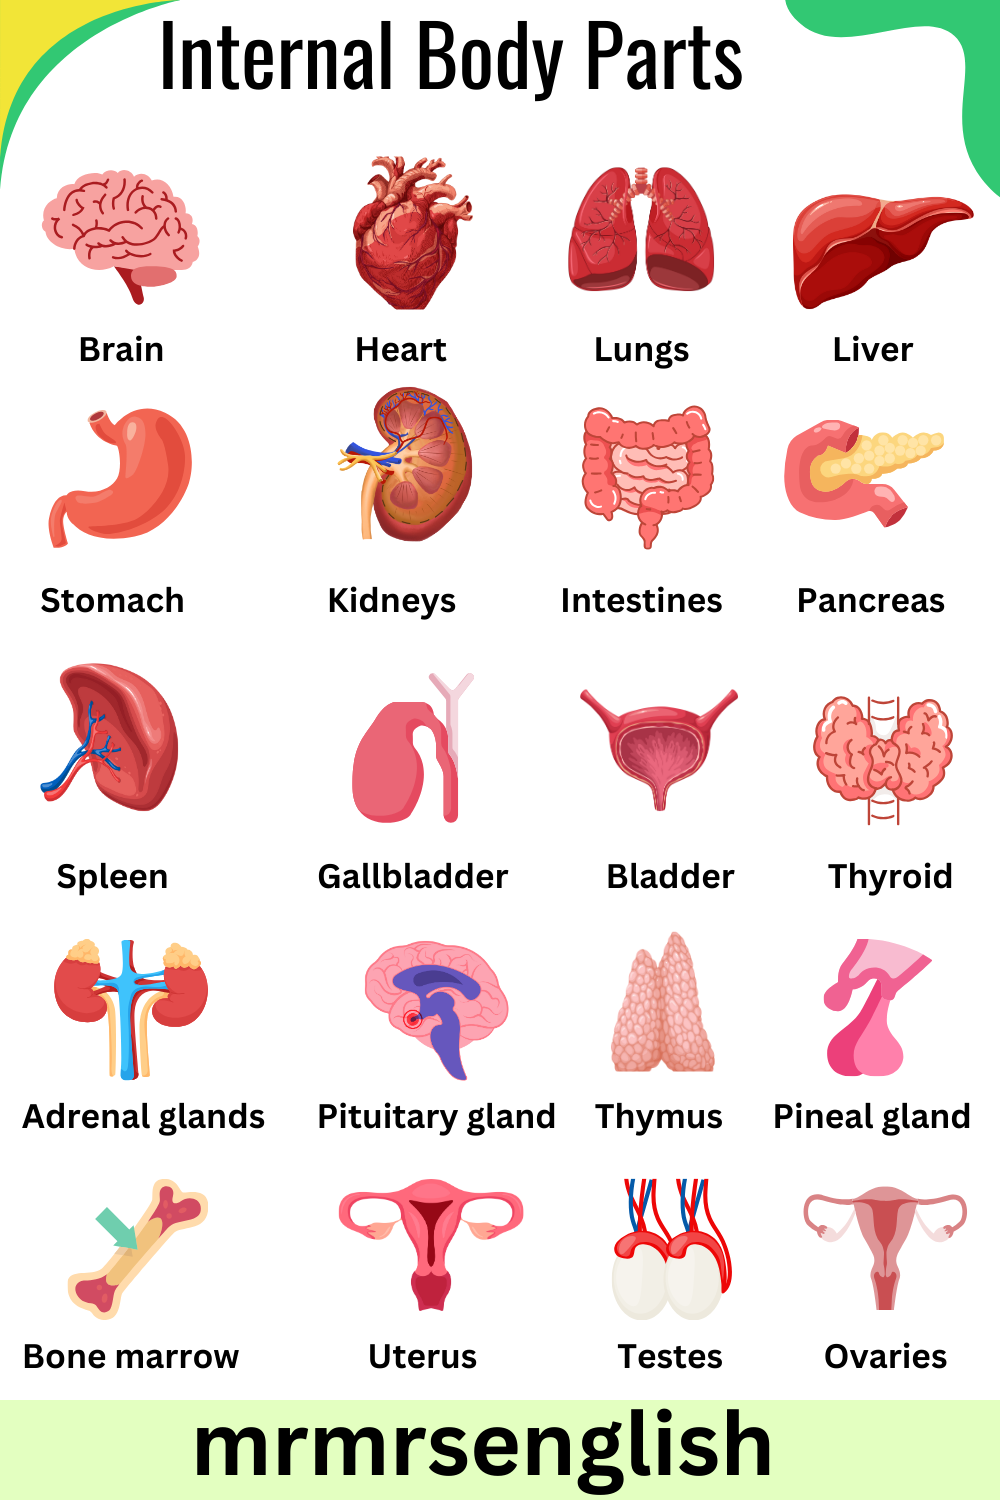 Internal Body Parts Names in English